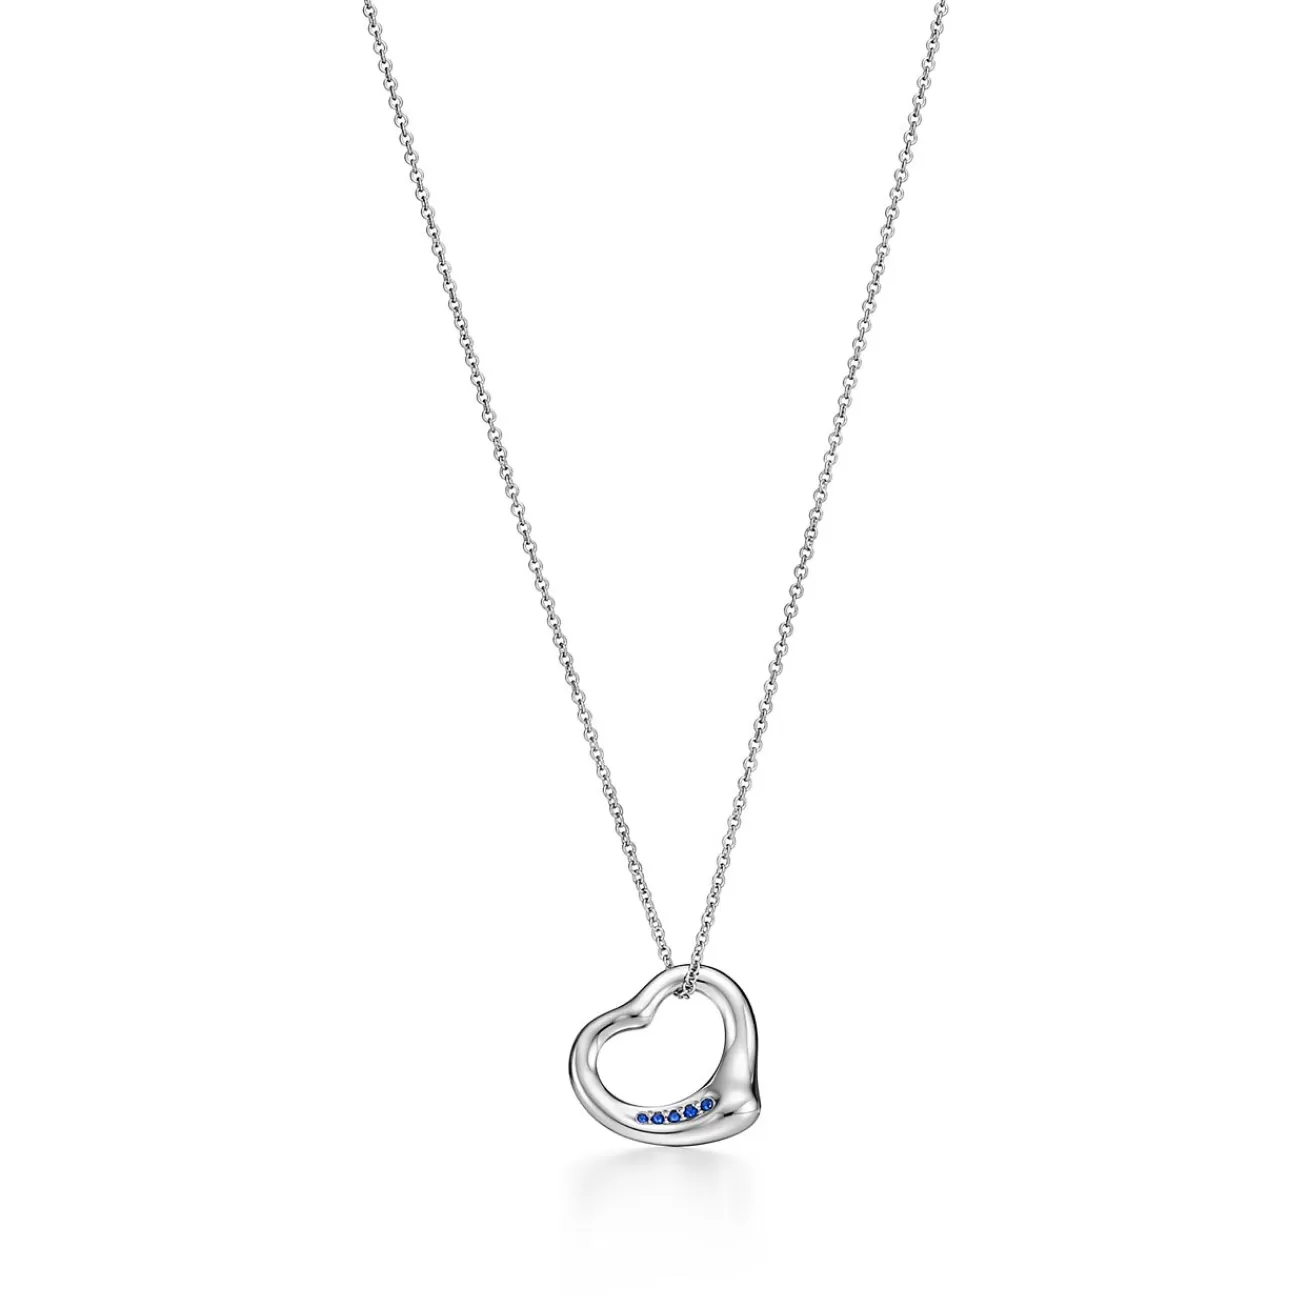 Tiffany & Co. Elsa Peretti® Open Heart Pendant in Platinum with Sapphires, 16 mm | ^ Necklaces & Pendants | Platinum Jewelry